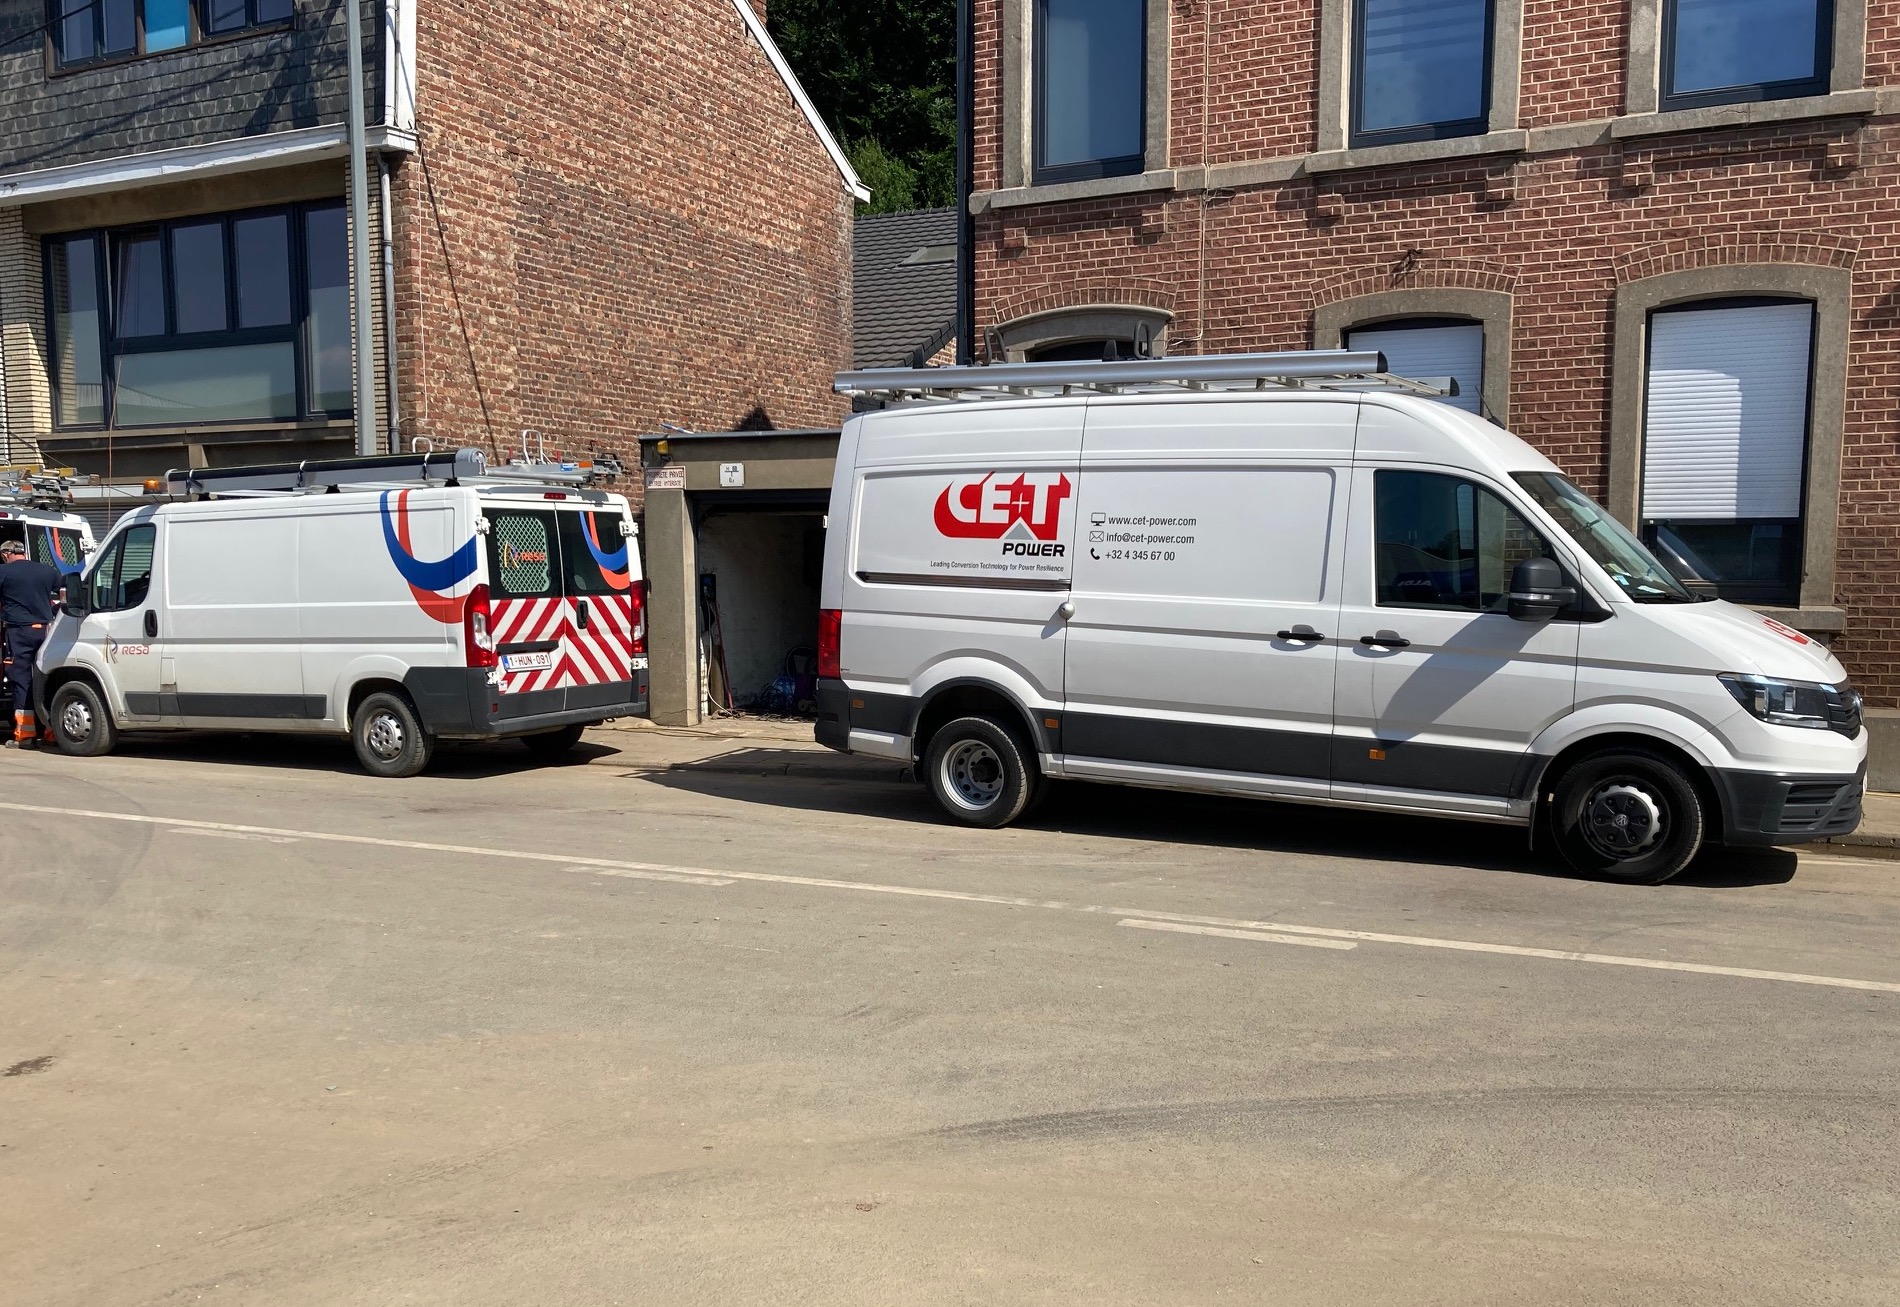 CE+T Services on site after the floodings in Belgium